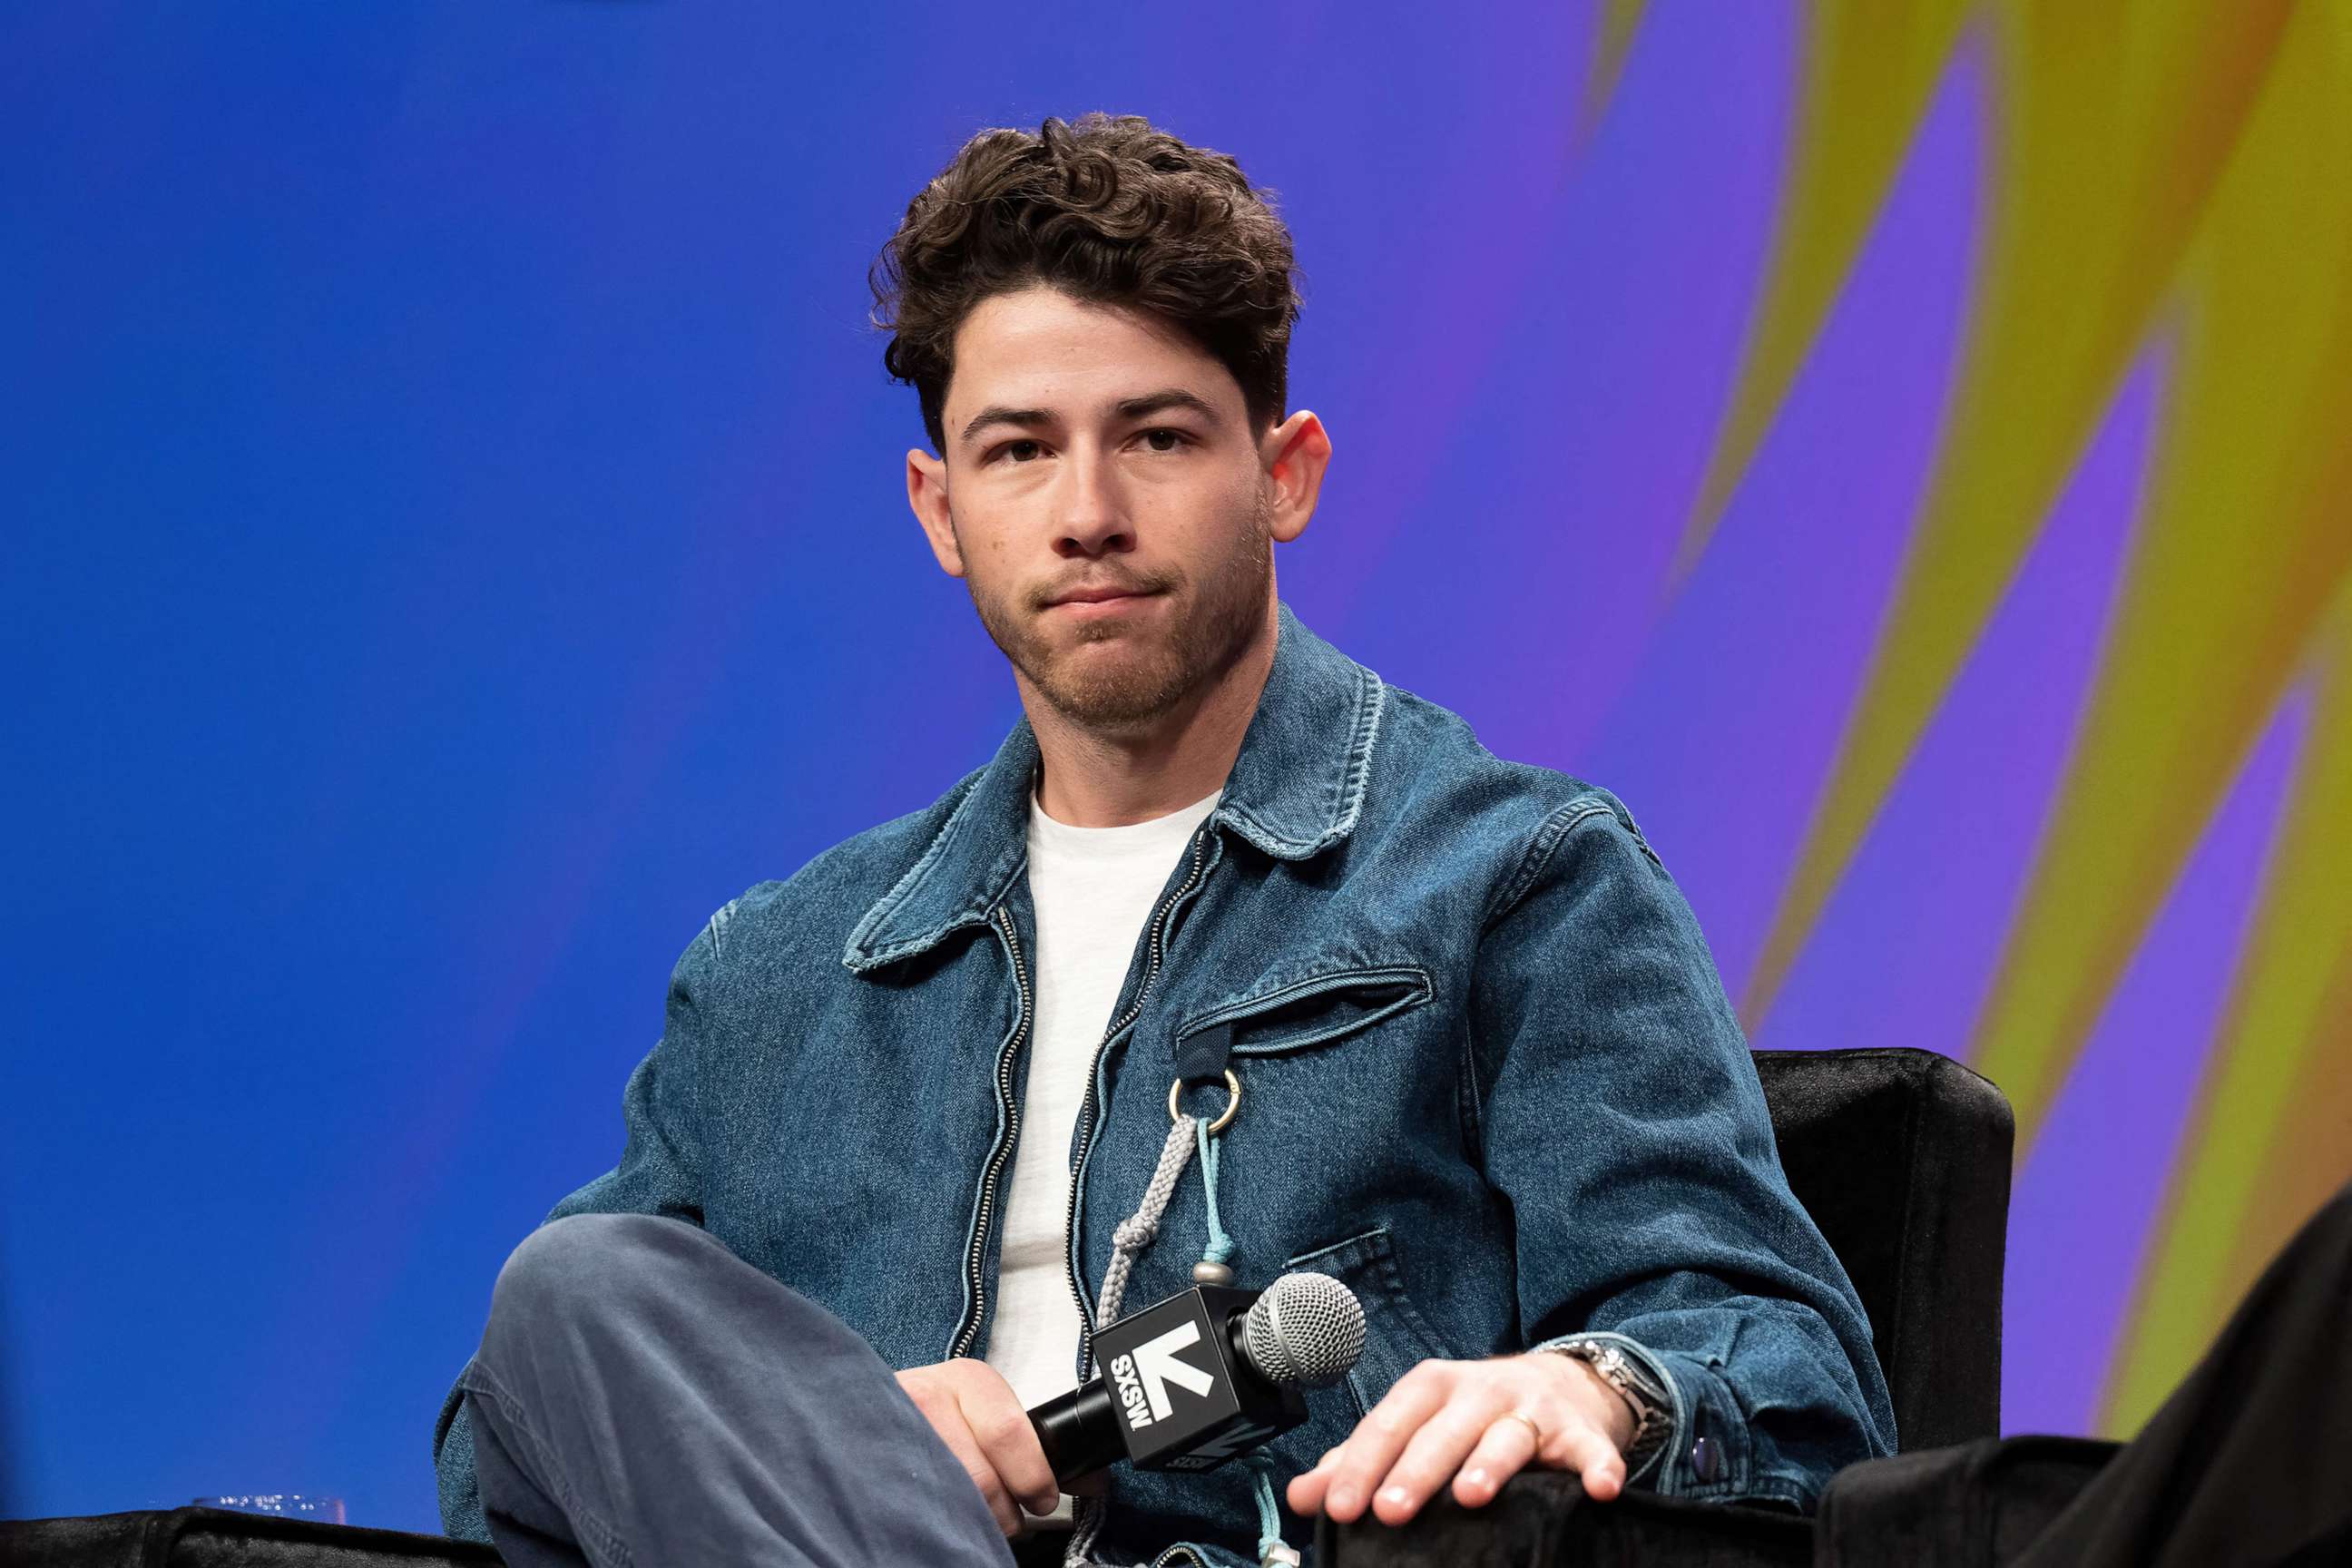 PHOTO: Nick Jonas participates in the featured session "Crushing: The Burden of Diabetes on Patients" at the Austin Convention Center during the SXSW Festival in Austin, Texas, on March 13, 2023.